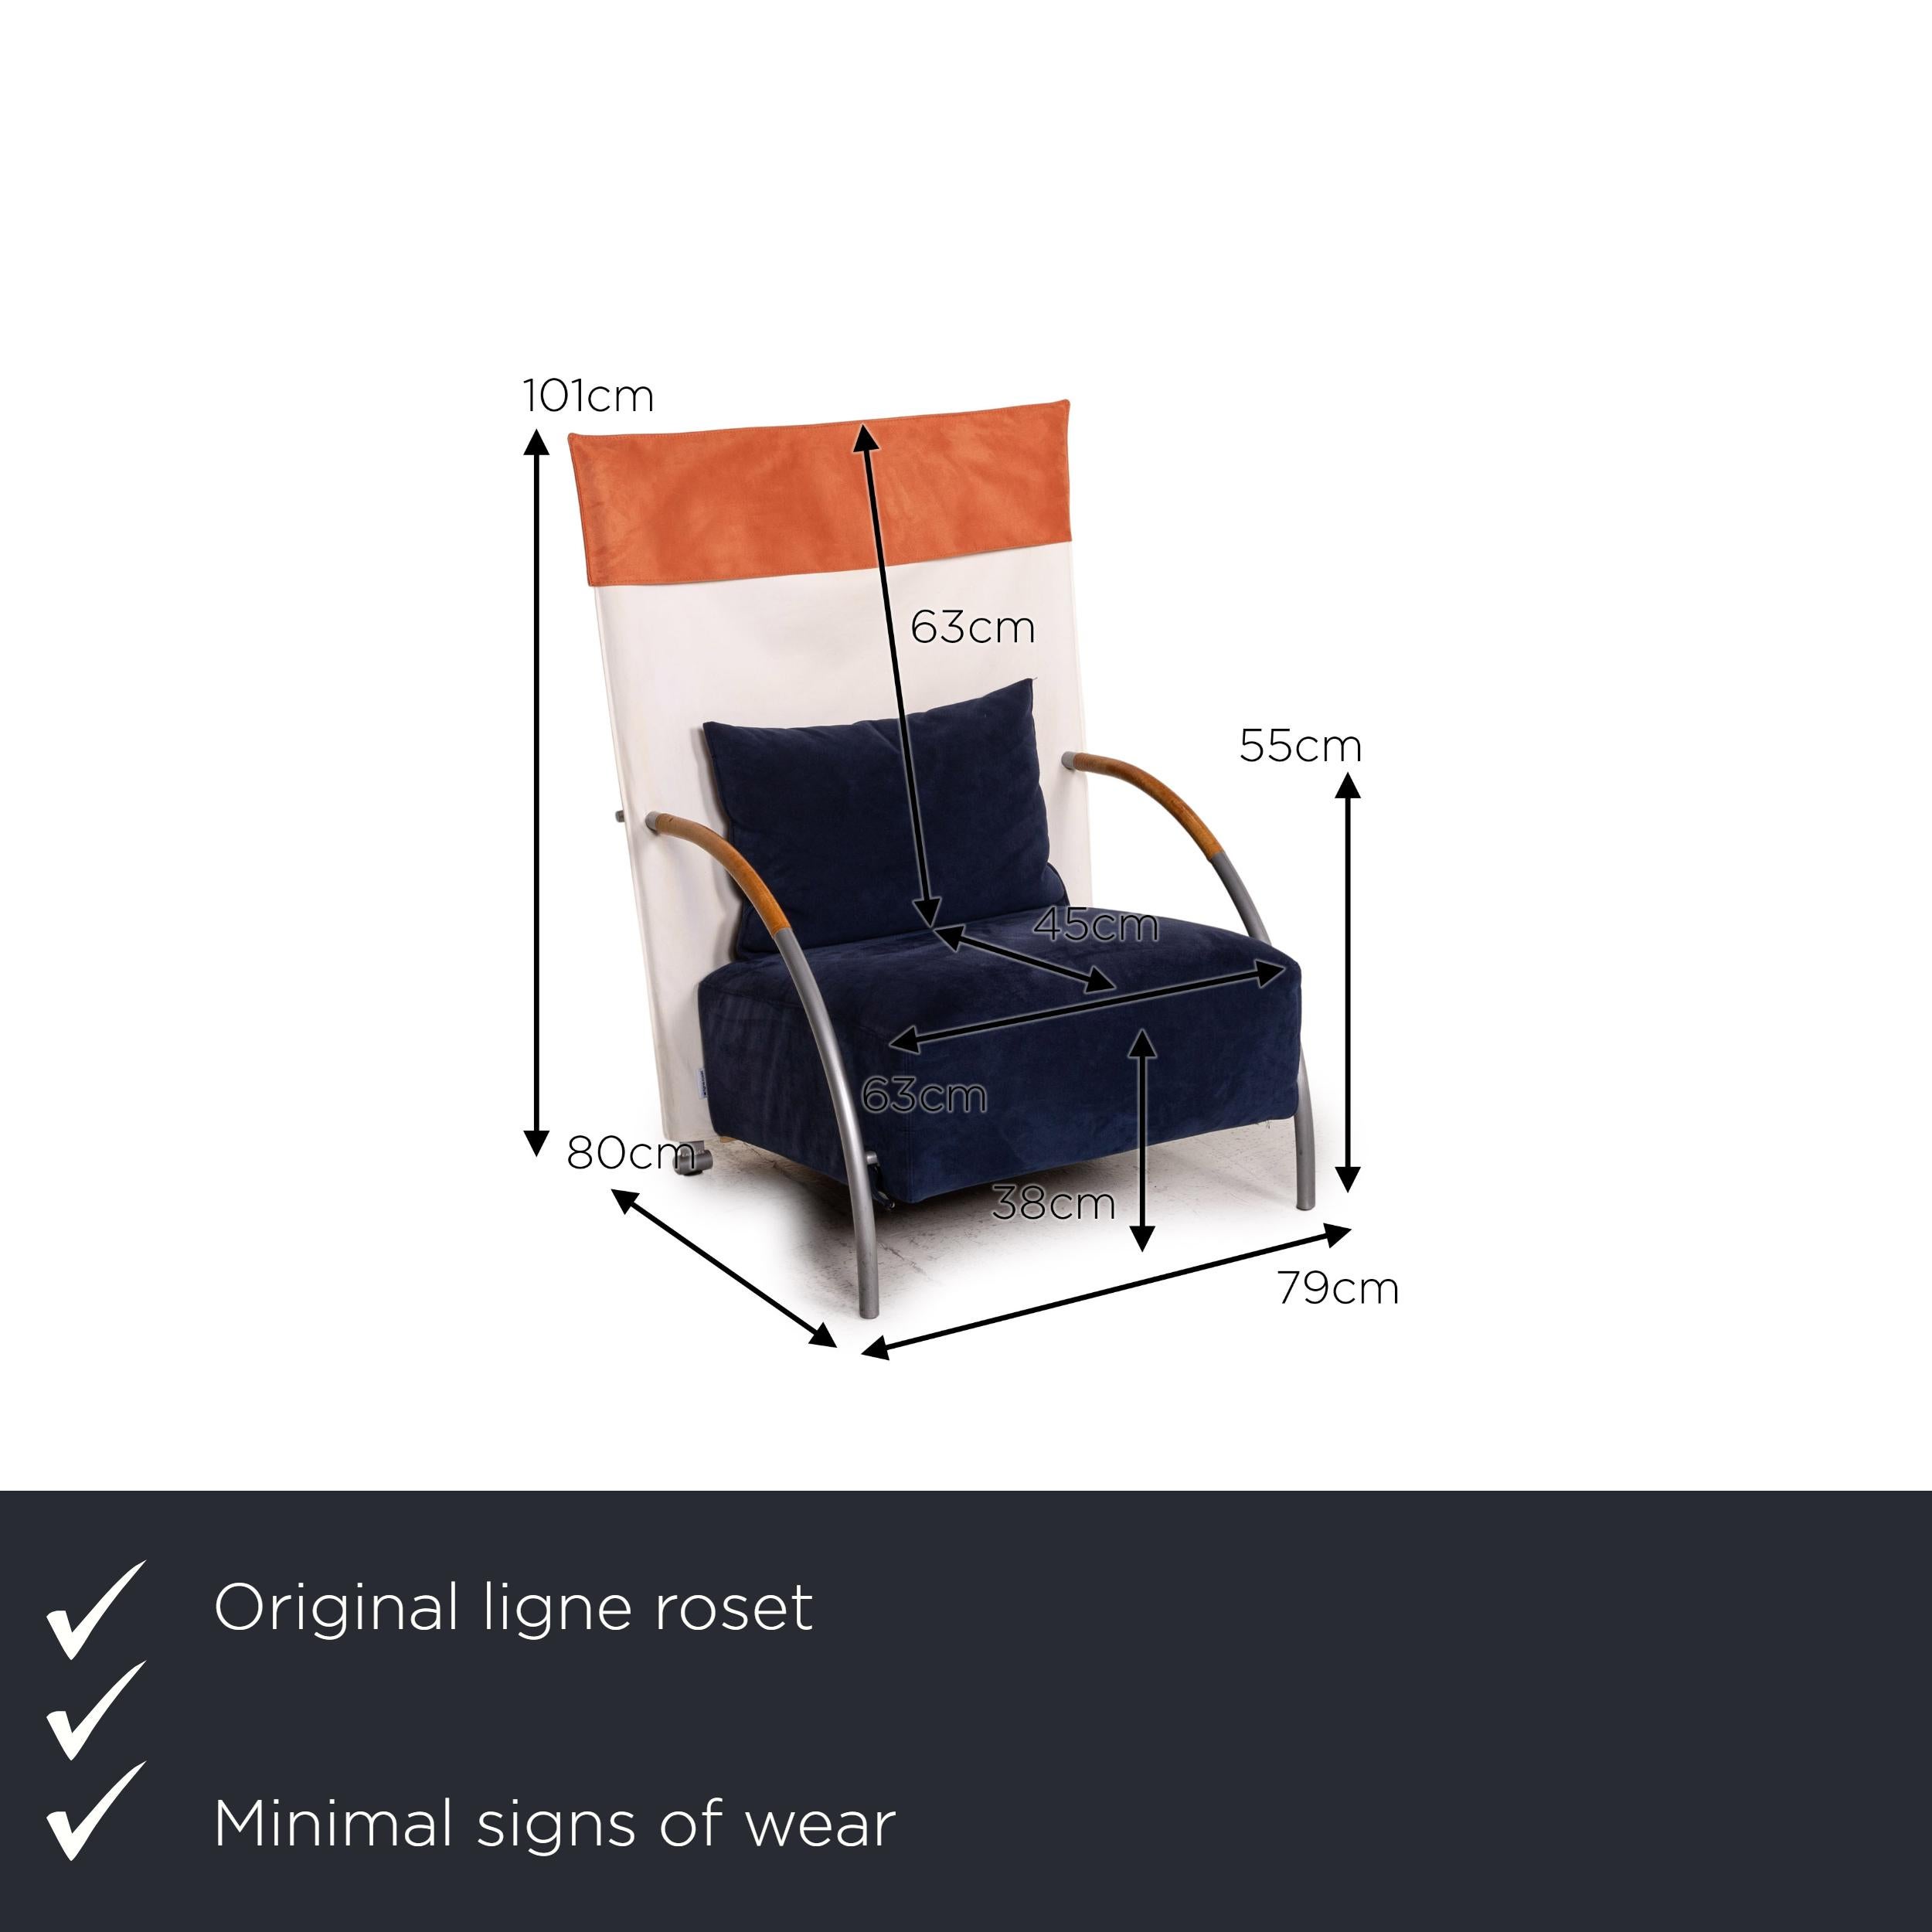 We present to you a Ligne Roset Habitus fabric armchair blue cream.
   
 

 Product measurements in centimeters:
 

 depth: 80
 width: 79
 height: 101
 seat height: 38
 rest height: 55
 seat depth: 45
 seat width: 63
 back height: 63.